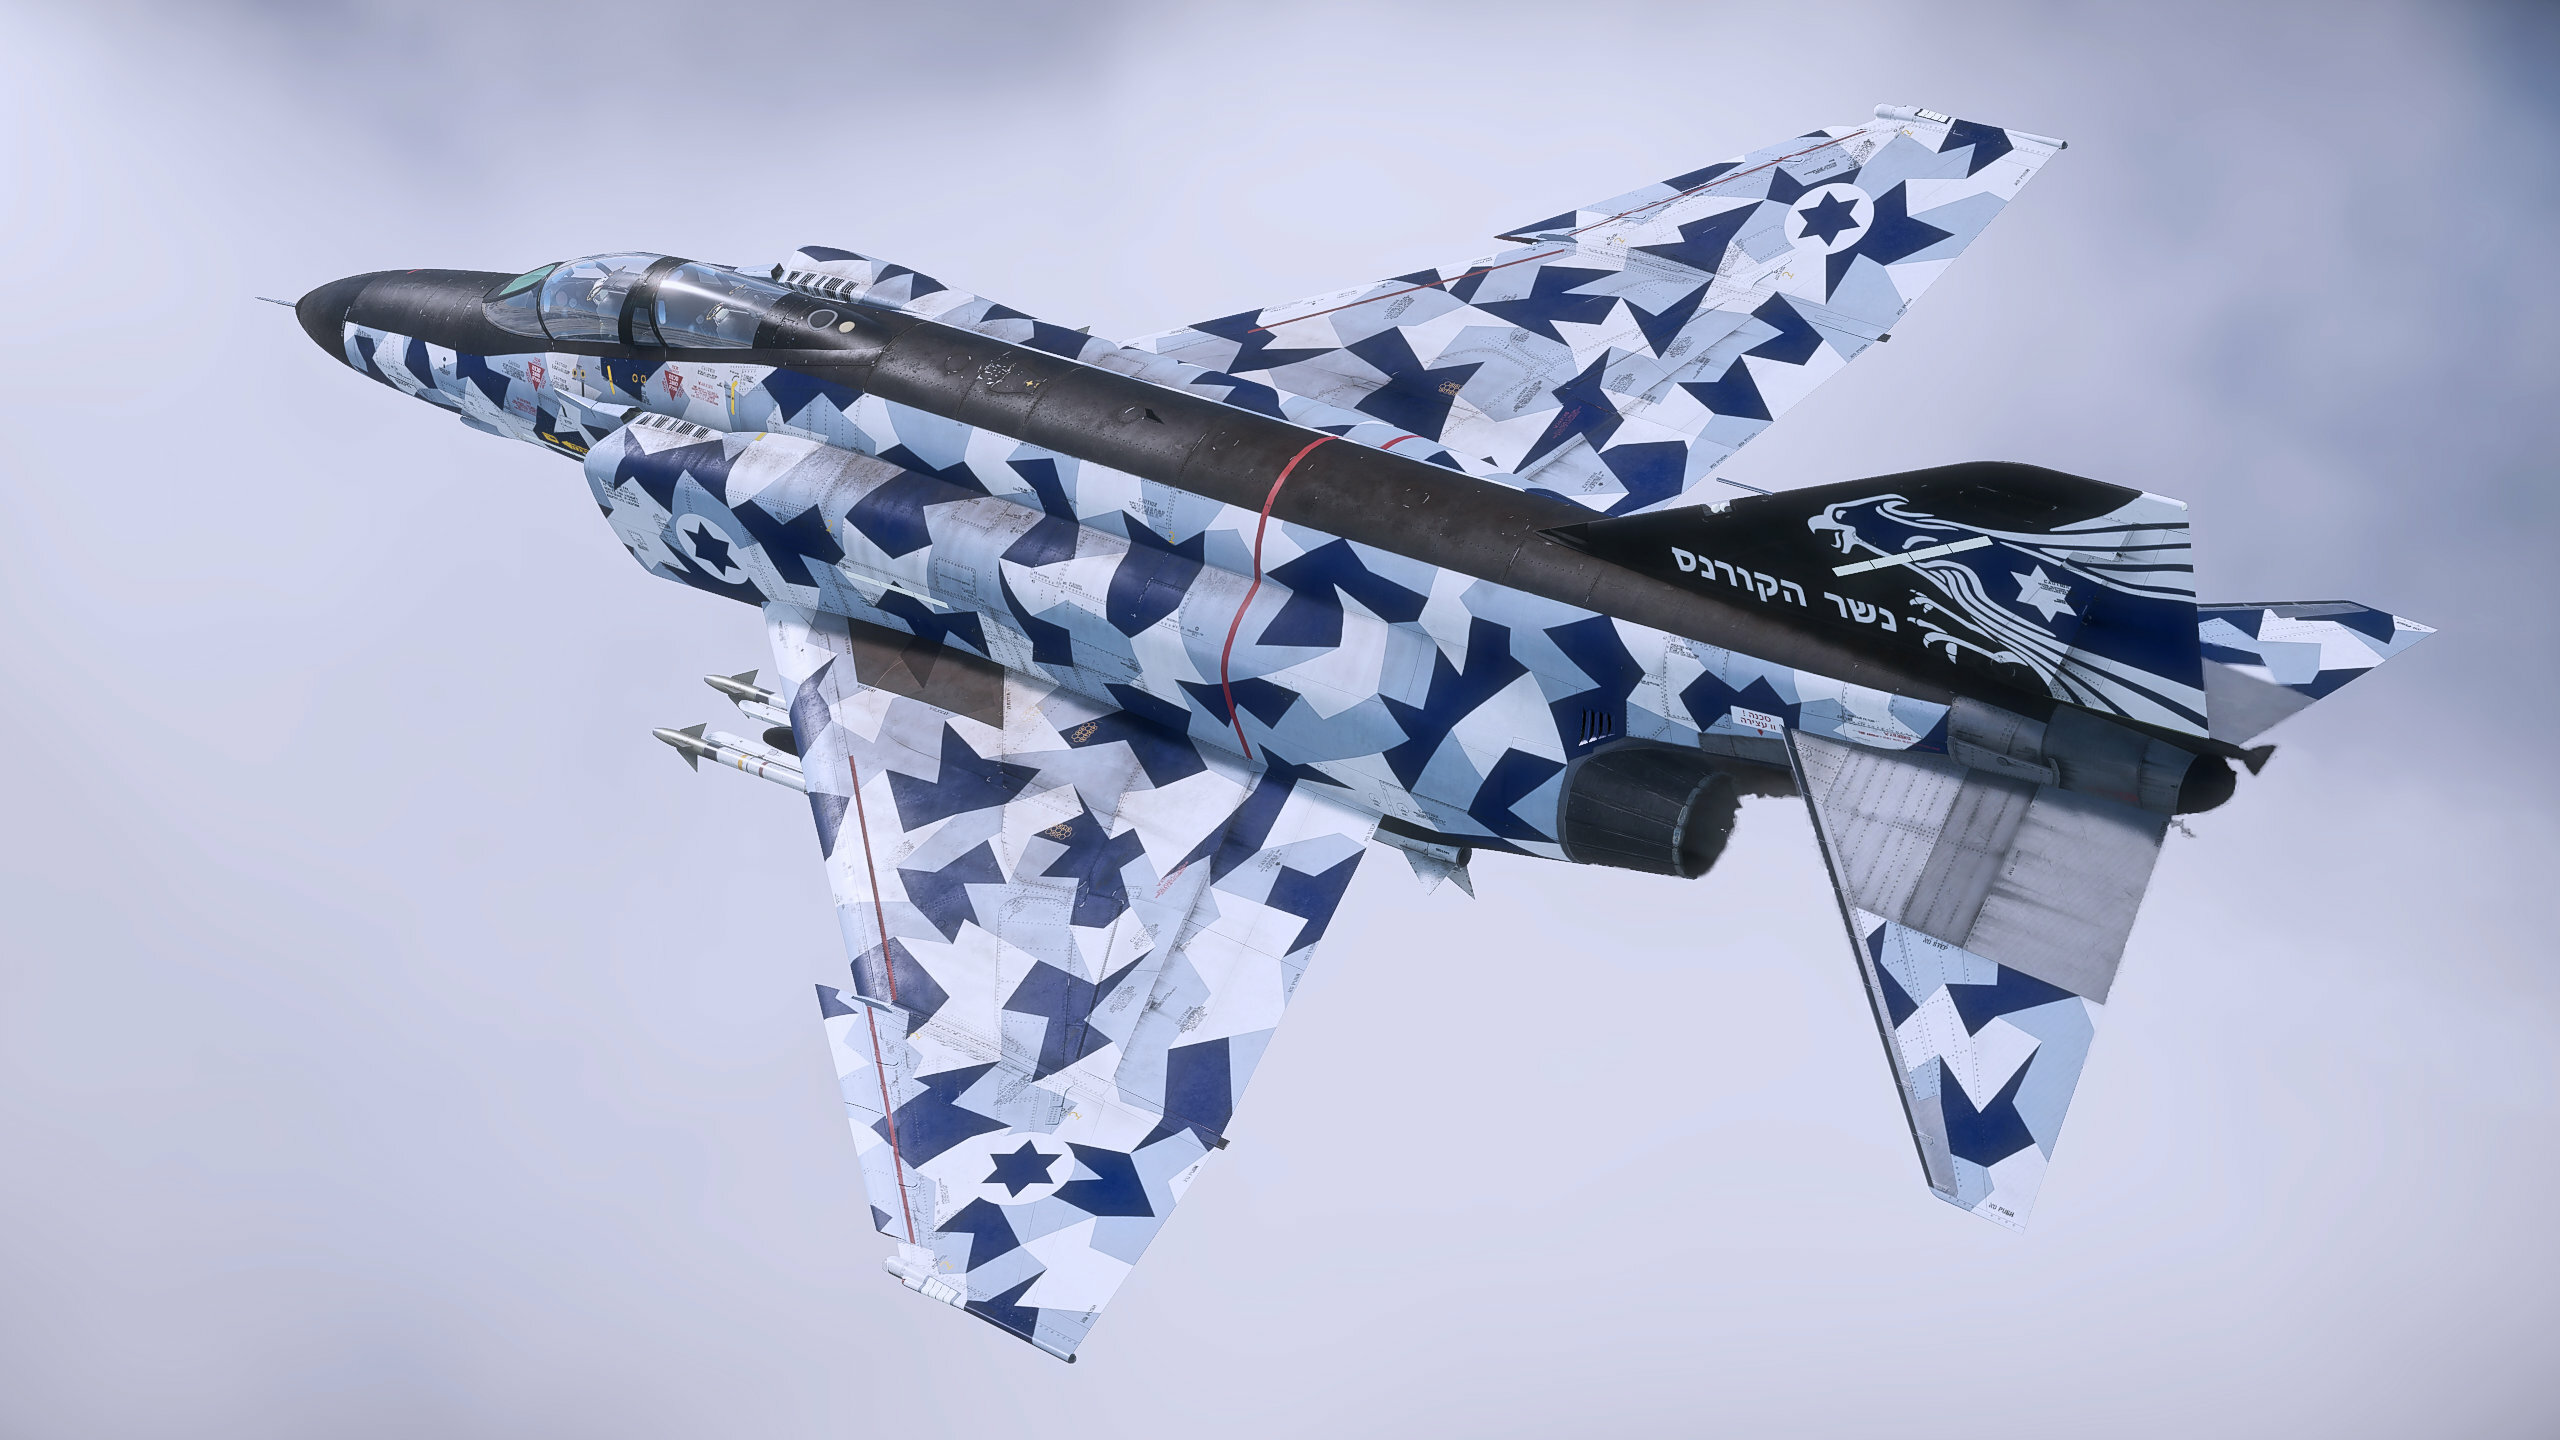 Twitch Drops are back! - News - War Thunder